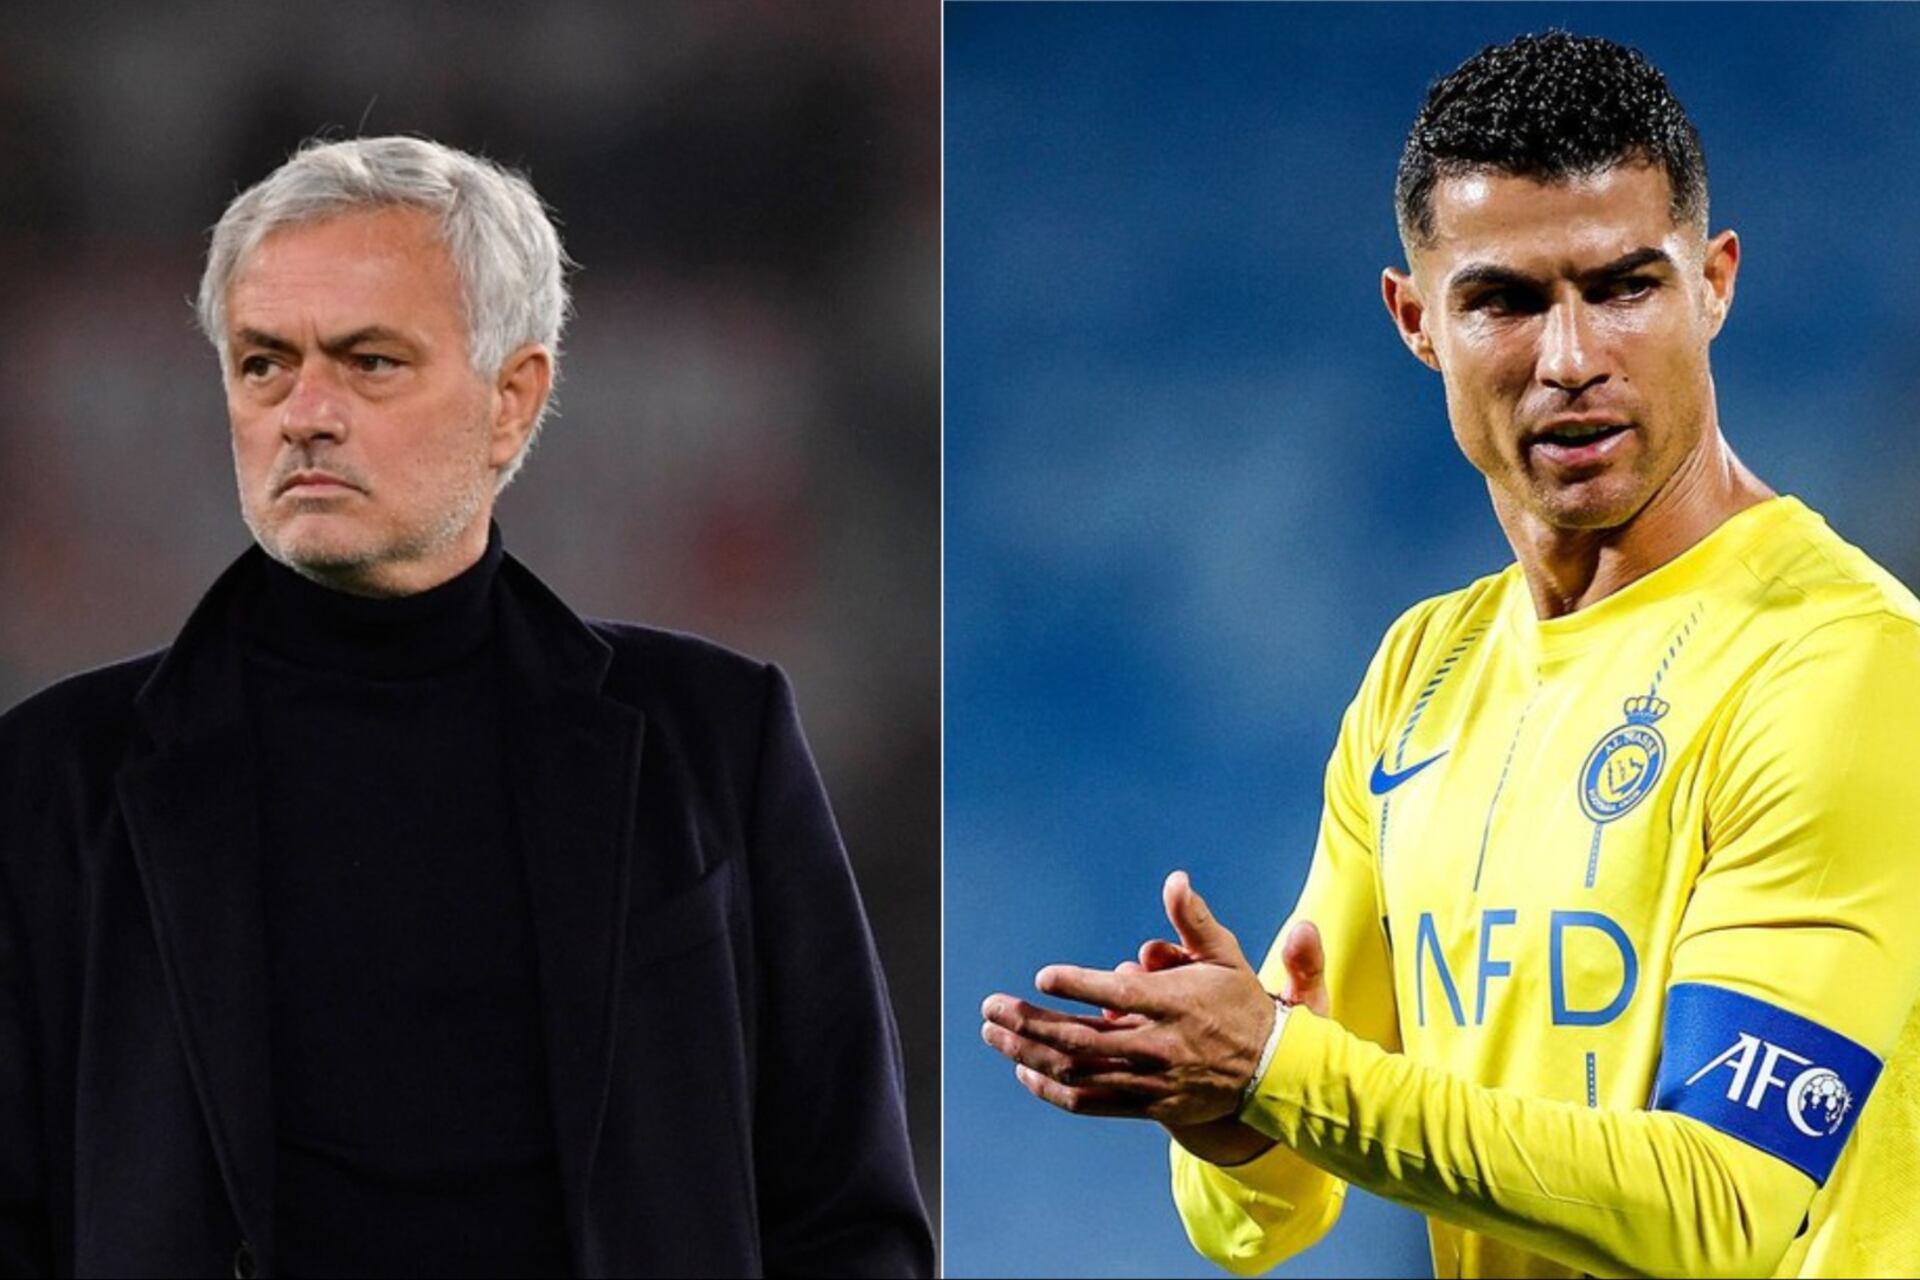 Not Cristiano, Jose Mourinho picks his favorite player he has ever coached